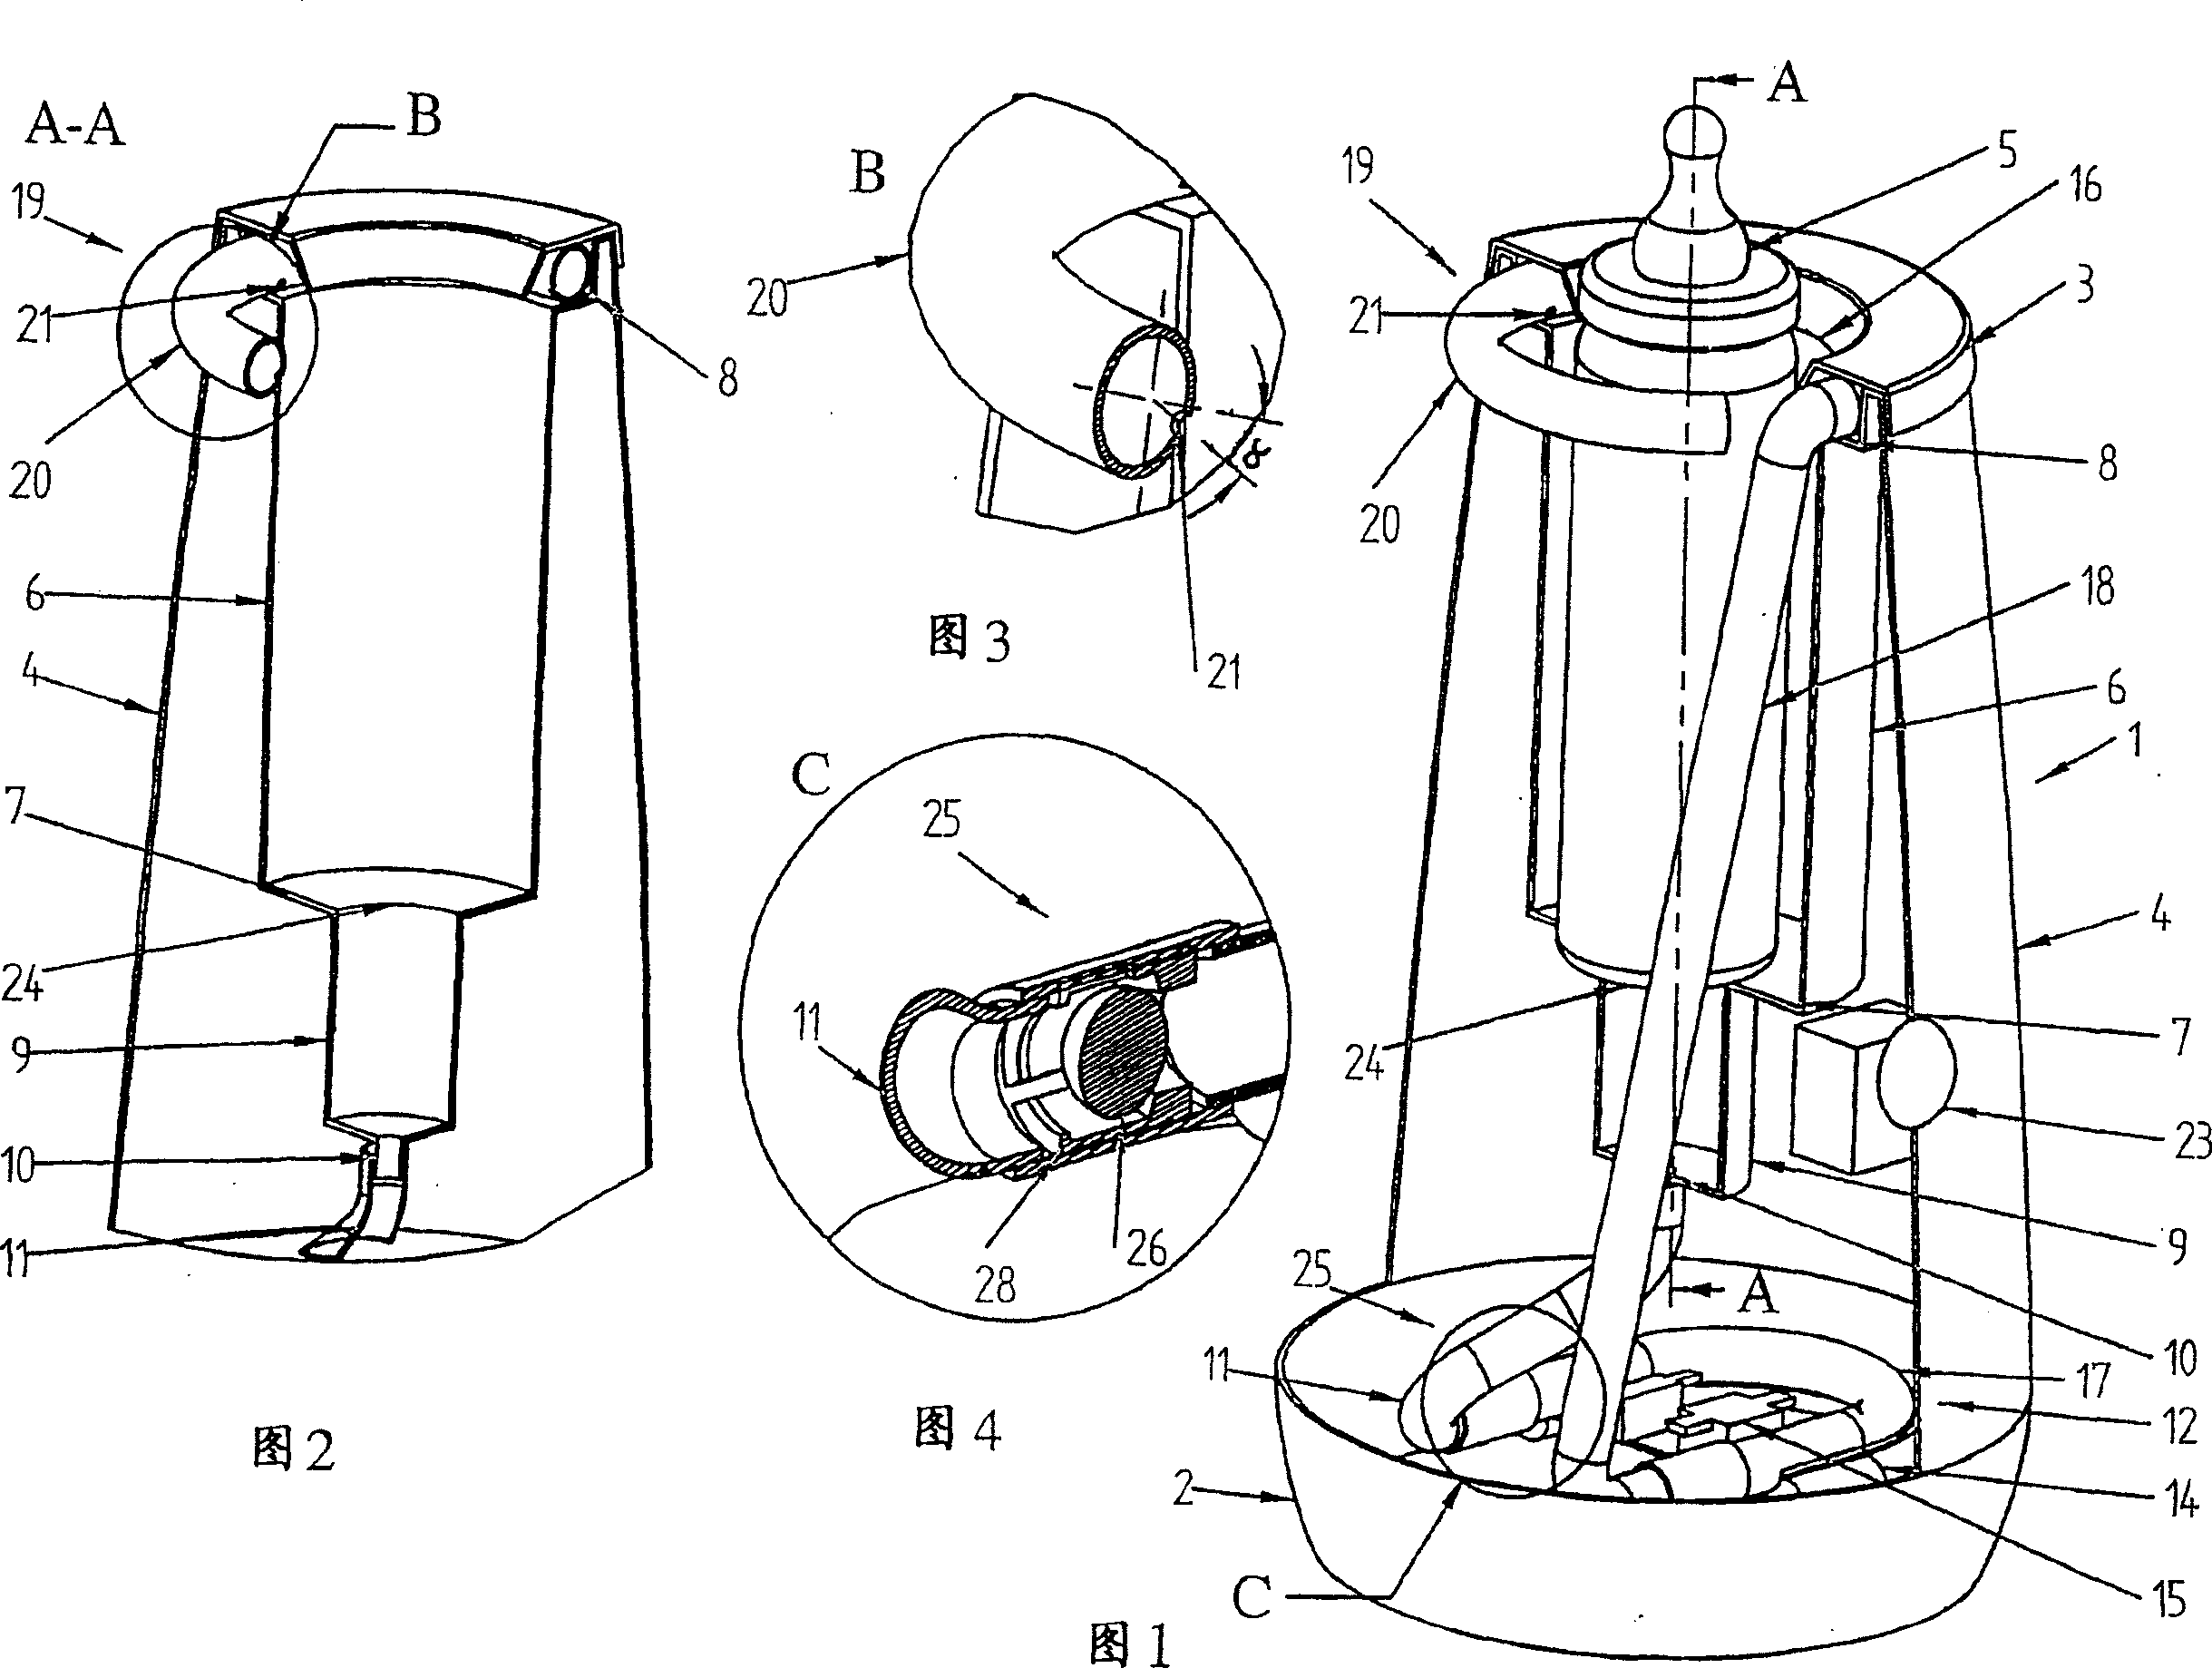 Apparatus for heating a vessel containing foodstuffs